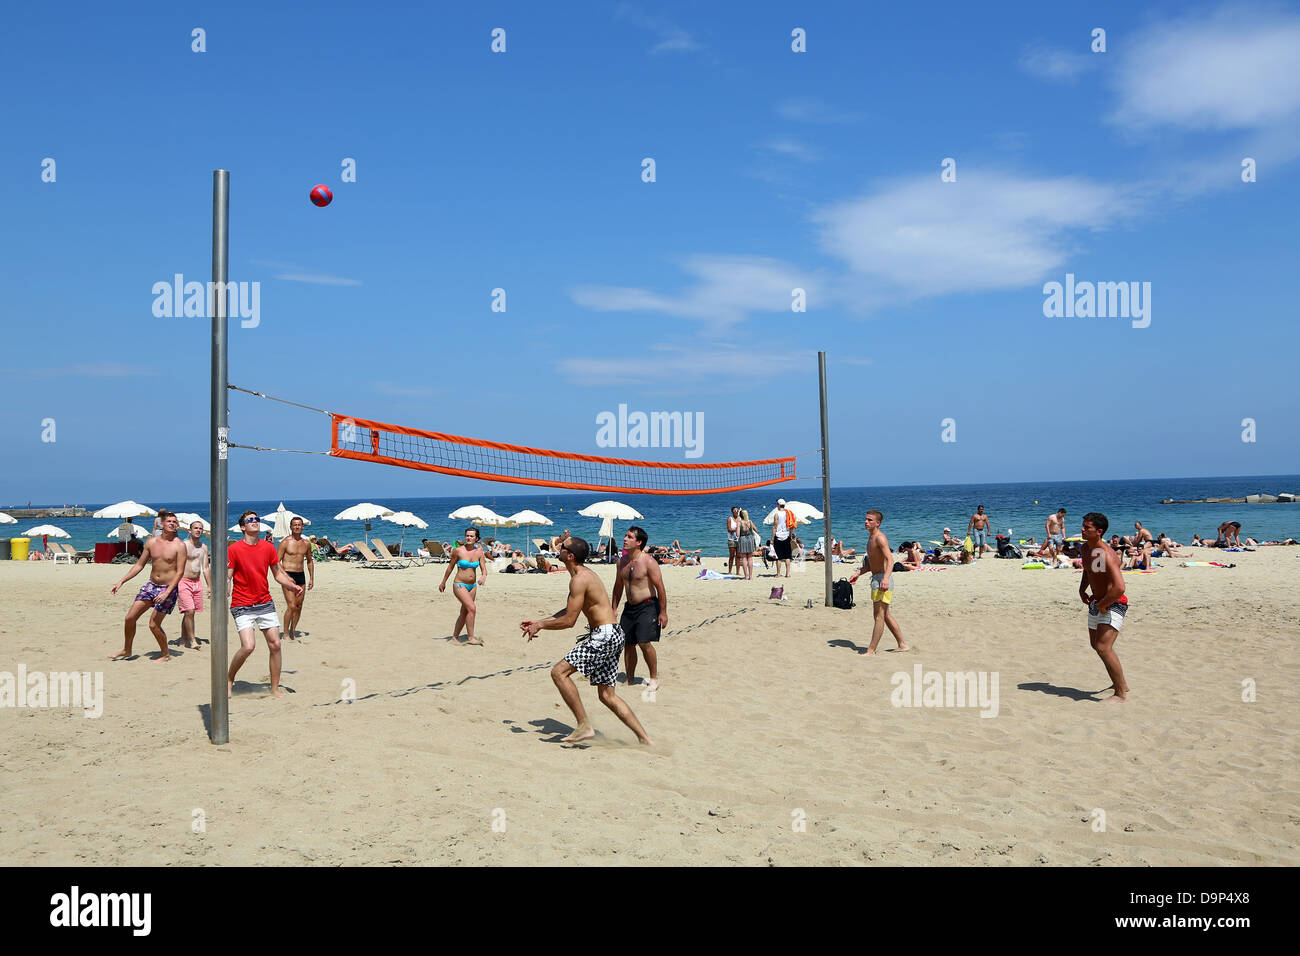 Scene of holiday makers playing volleyball on the beach, Barcelona, Spain Stock Photo